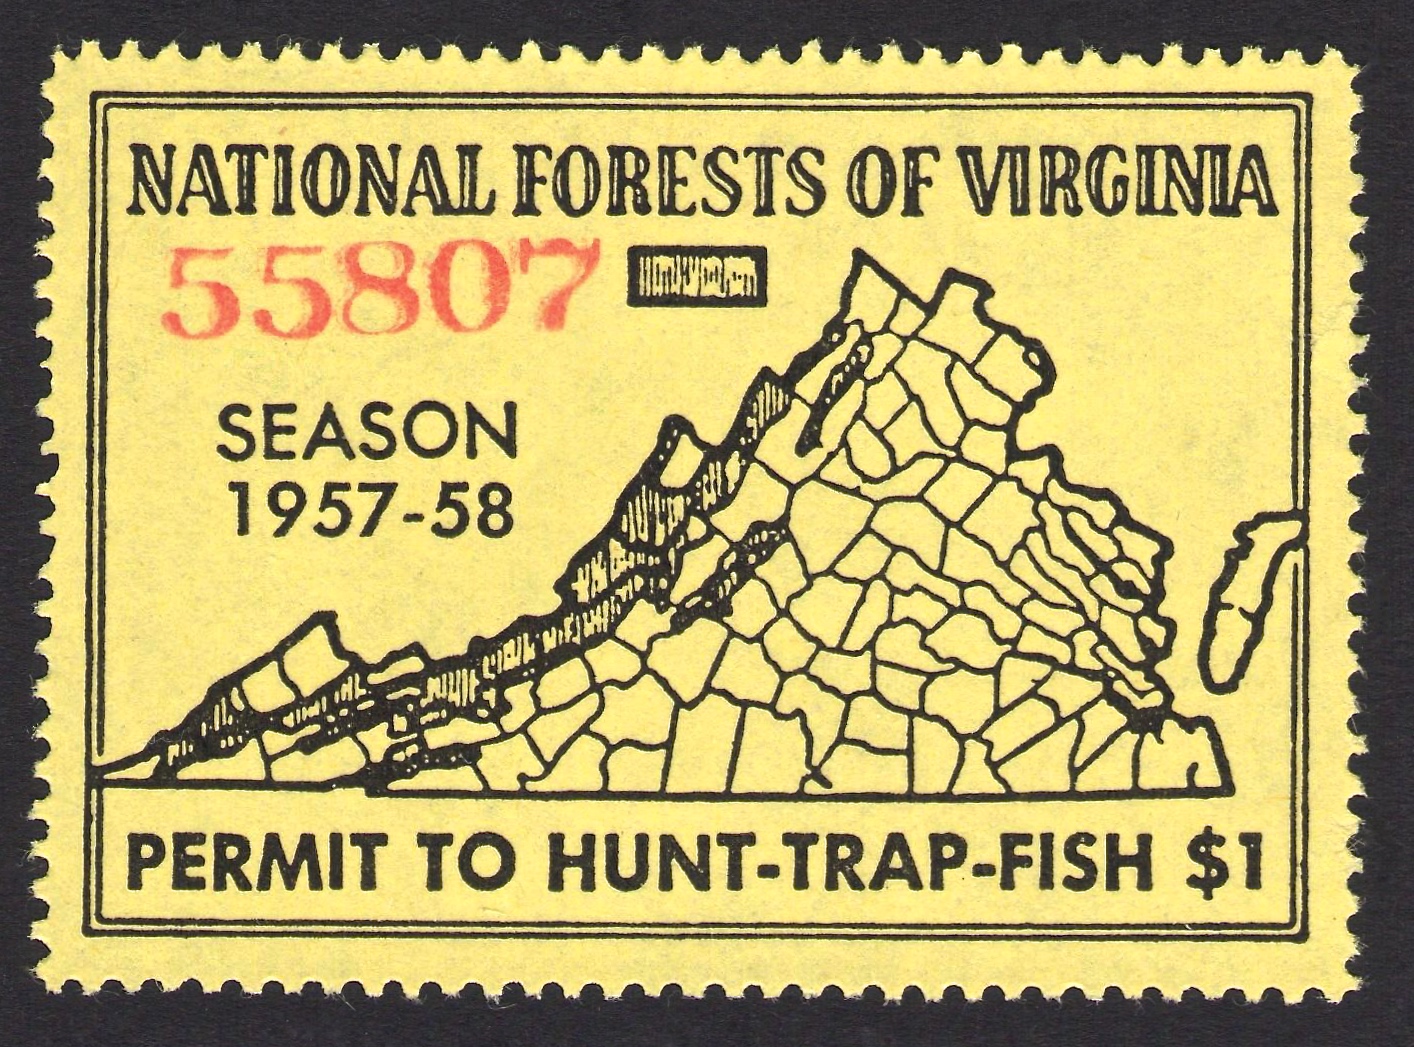 1957-58 National Forest Virginia